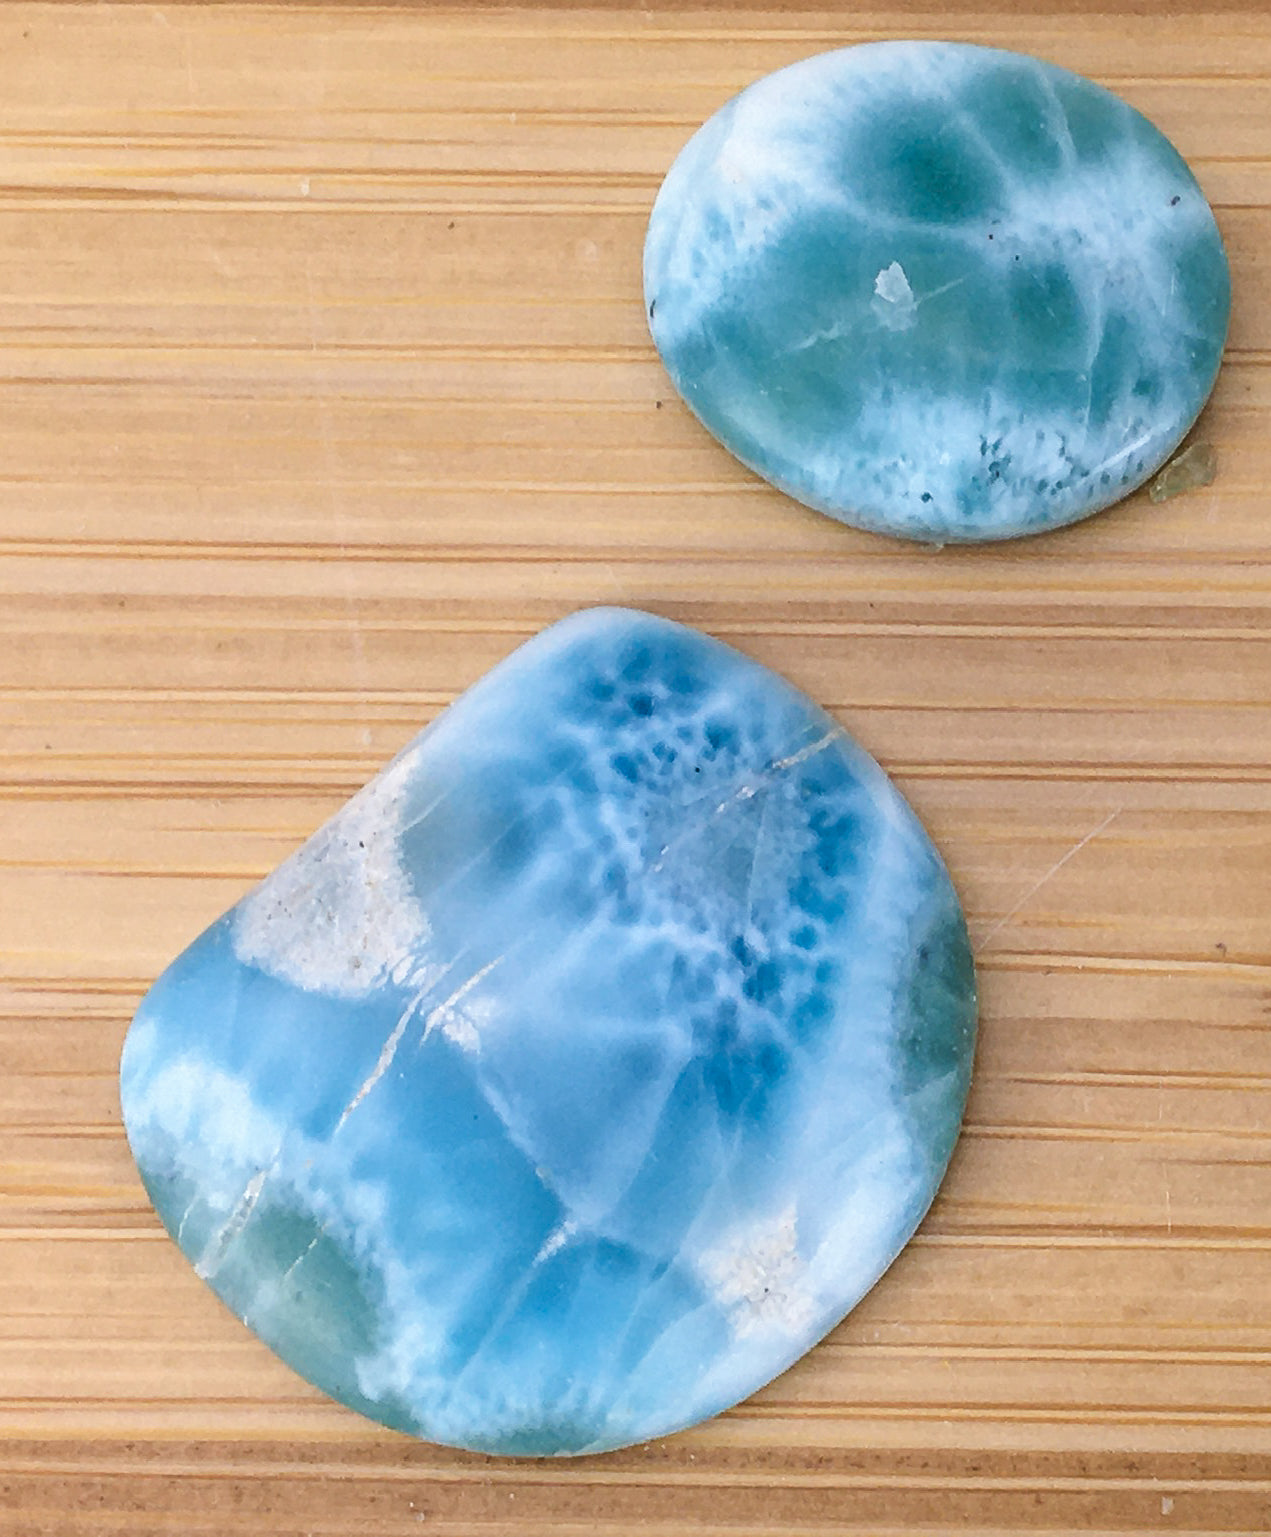 two Larimar cabochons on a wood grain surface. The Larimar is a watery blue